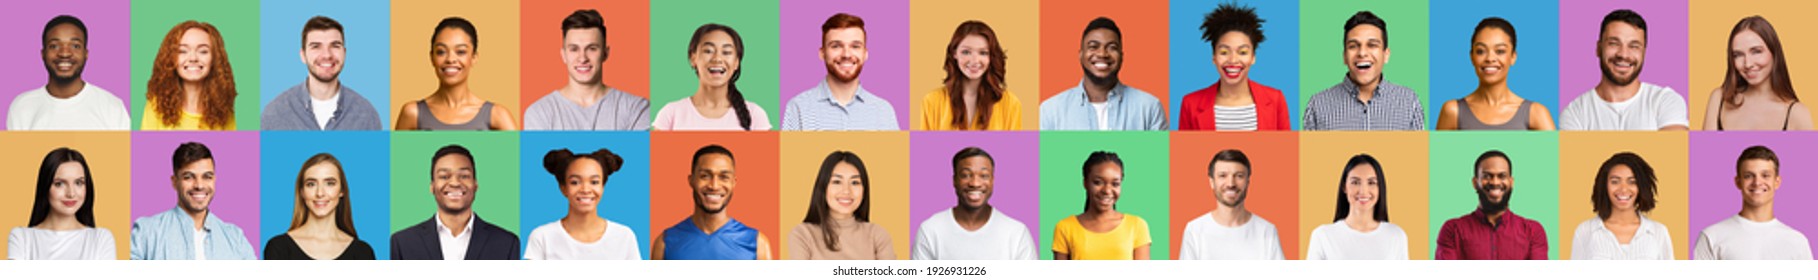 Colorful Mosaic Of Happy Faces And Portraits Of Young Millennial People Smiling Posing On Different Colored Backgrounds  Millennials Generation  Successful Multicutural People Group Portrait  Collage